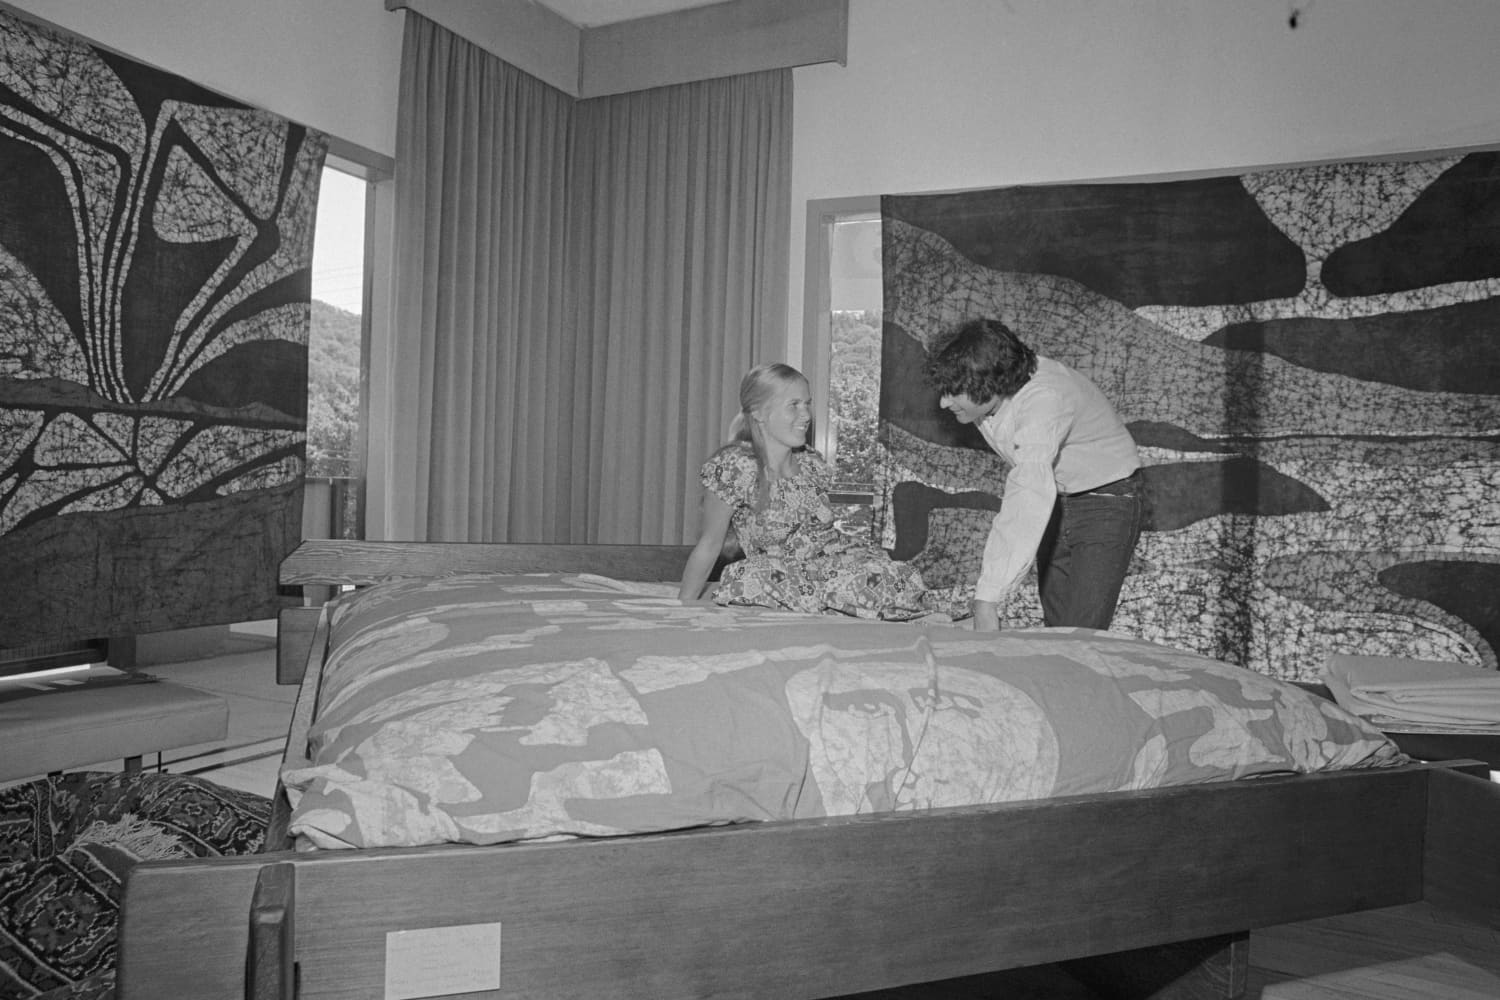 A Brief History of the Waterbed